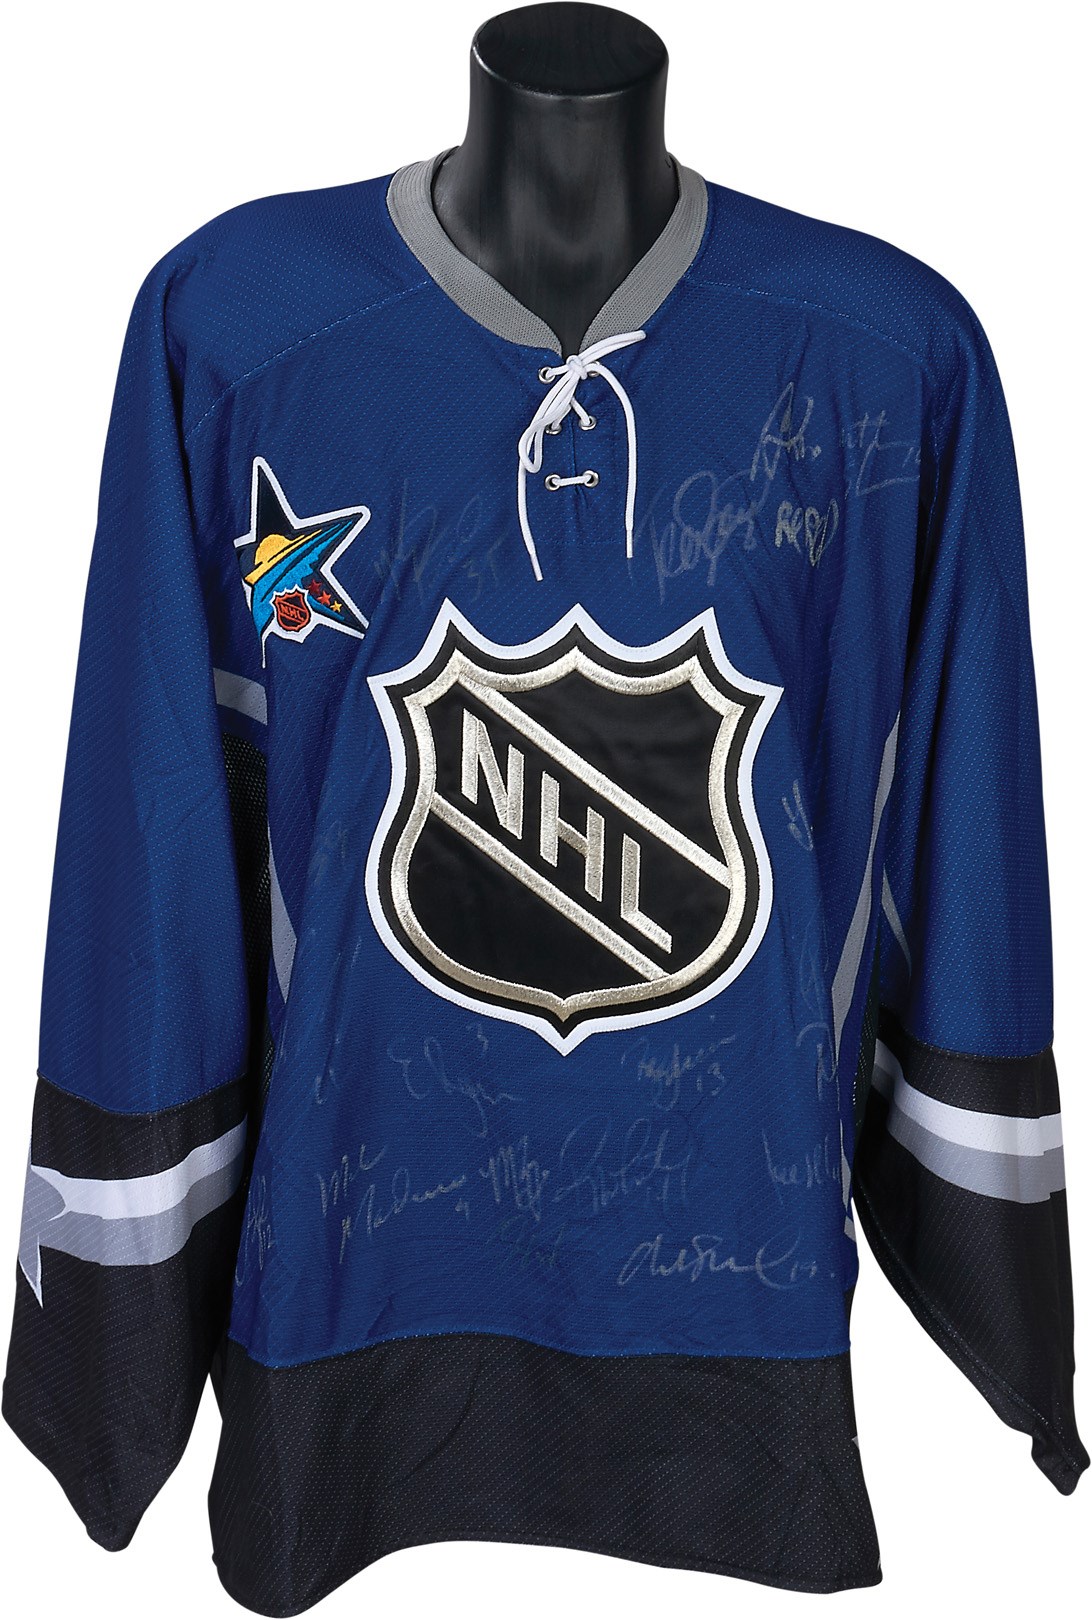 Internet Only - 2002-03 NHL Western Conference All-Star Team-Signed Jersey